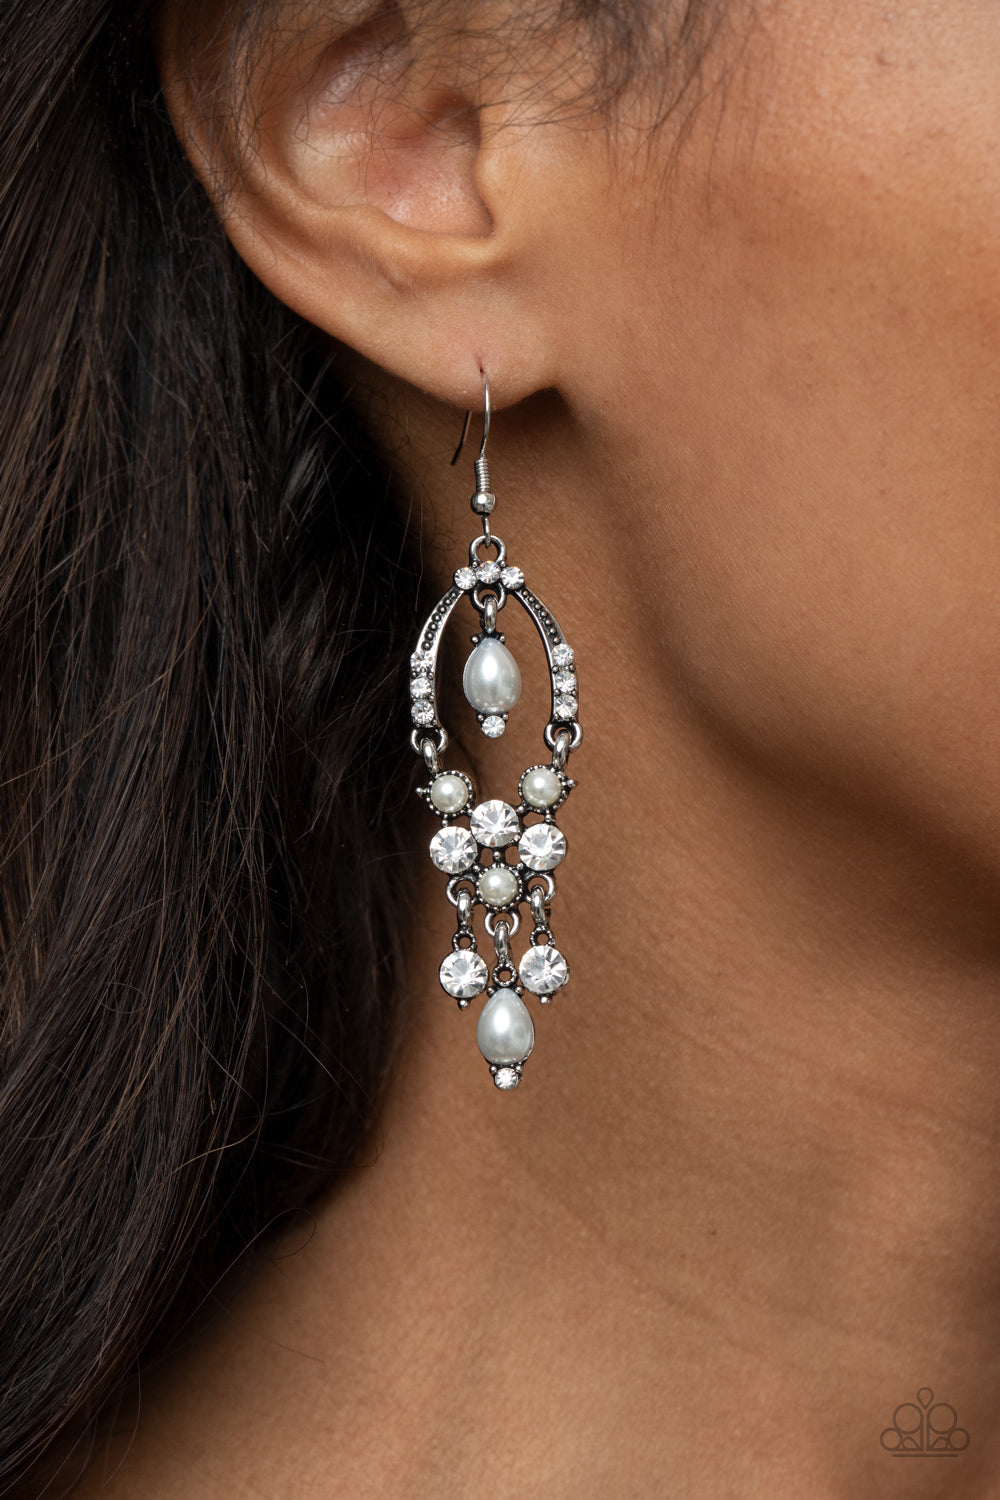 Back In The Spotlight White Earring - Paparazzi Accessories. Glittery white rhinestones and pearly white beaded fittings delicately swing from the bottom of an ornately embellished oval frame. A matching pearly frame dangles from the top of the decorative silver frame, adding a timeless movement to the sparkly display. Earring attaches to a standard fishhook fitting.  All Paparazzi Accessories are lead free and nickel free!  Sold as one pair of earrings.